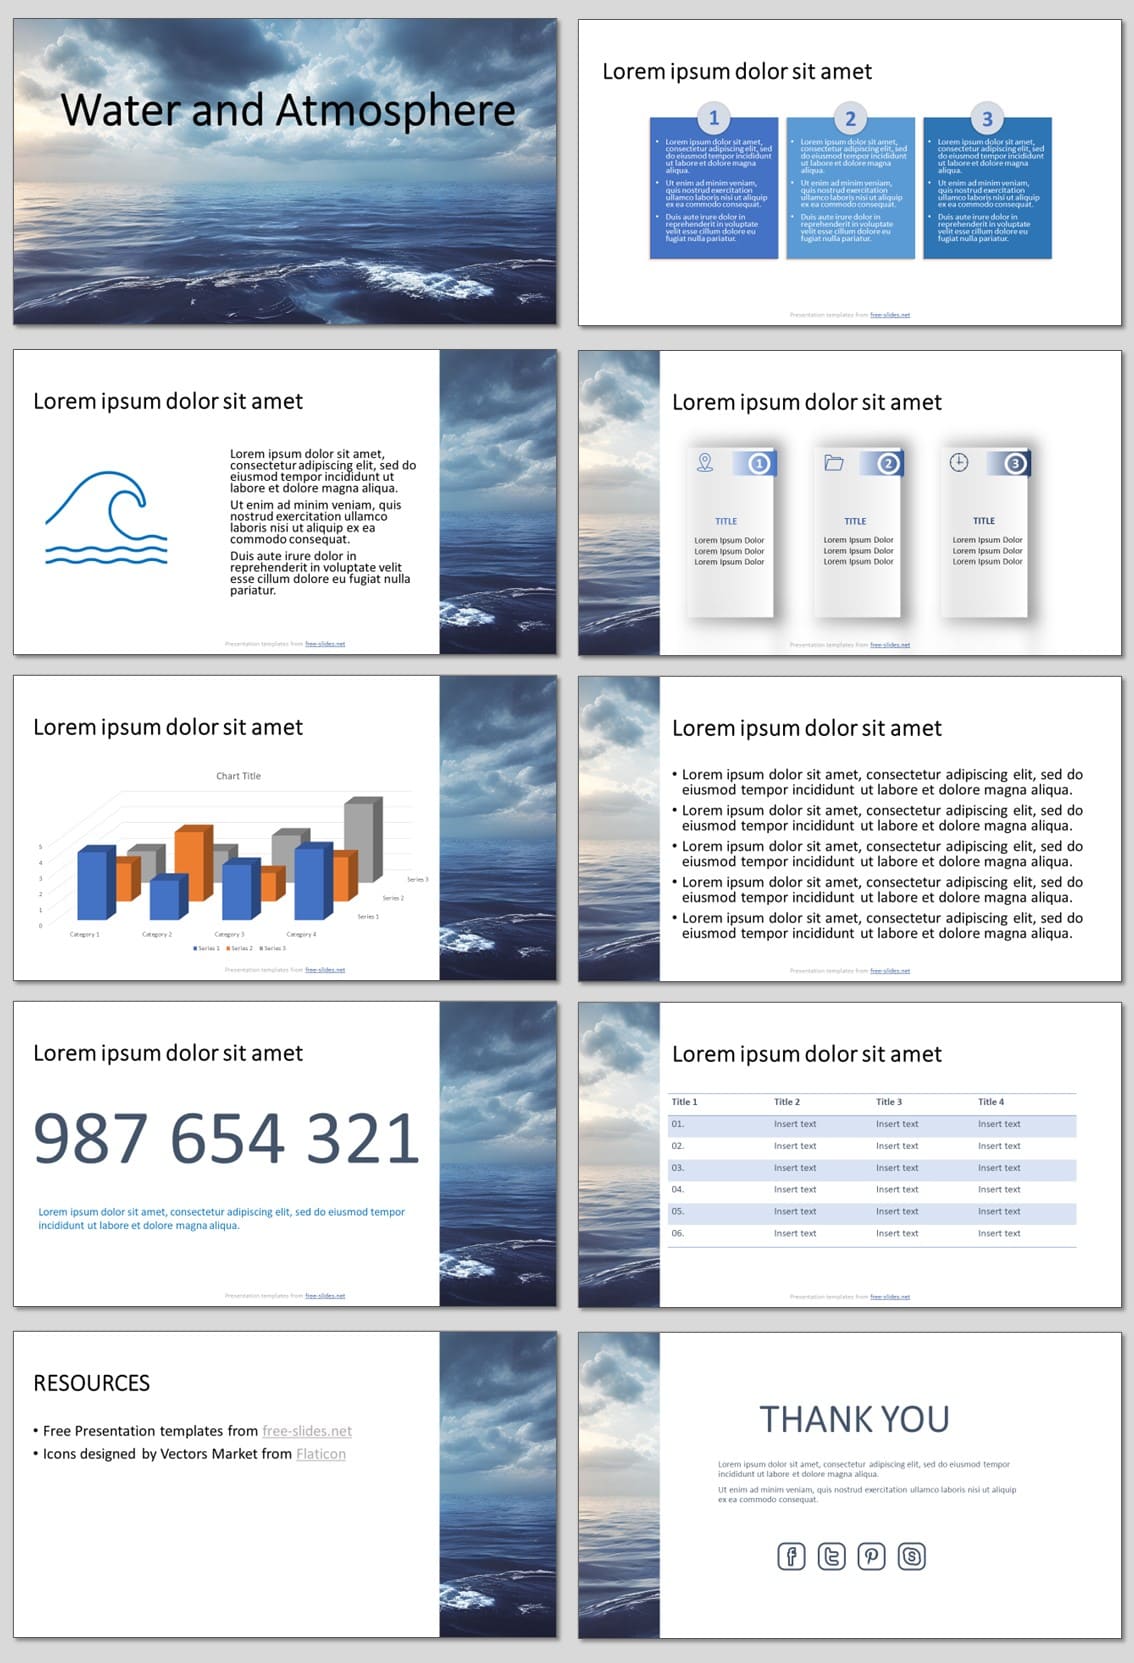 Water and Atmosphere - Free PowerPoint Template and Google Slides Theme